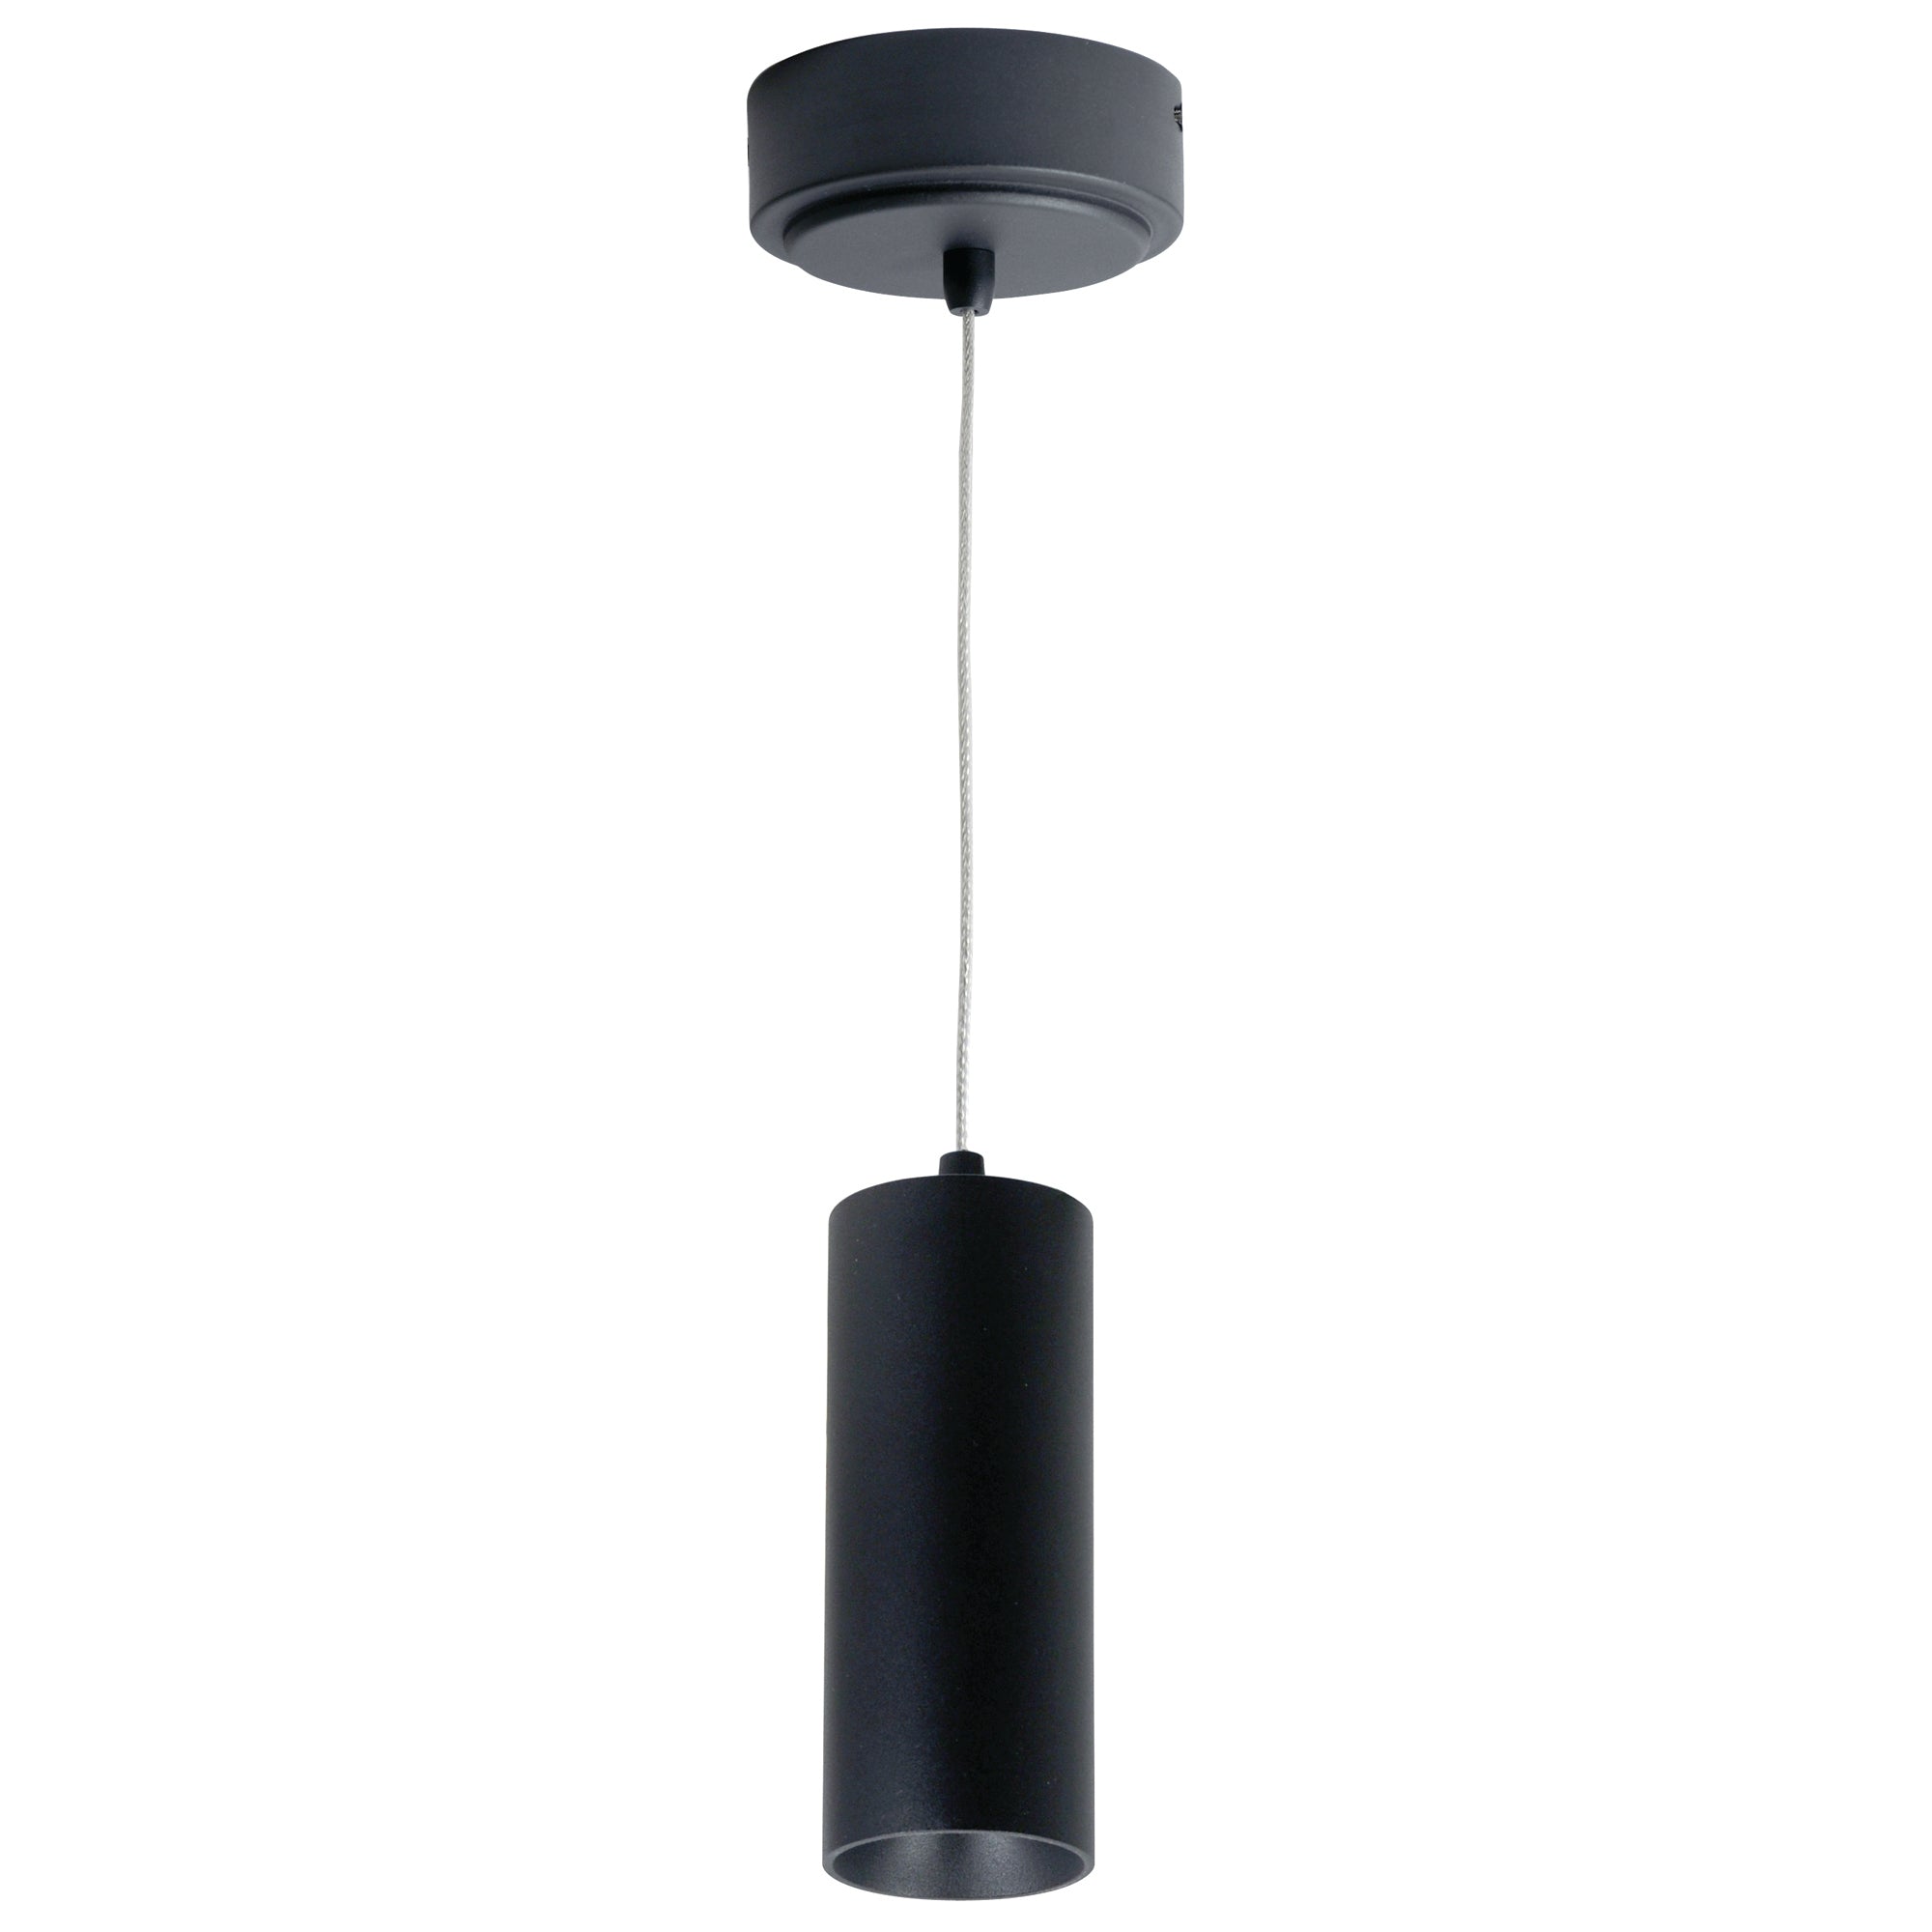 Nora Lighting LE56 - NYLM-2C35XBBLE4A - Cylinder - Black